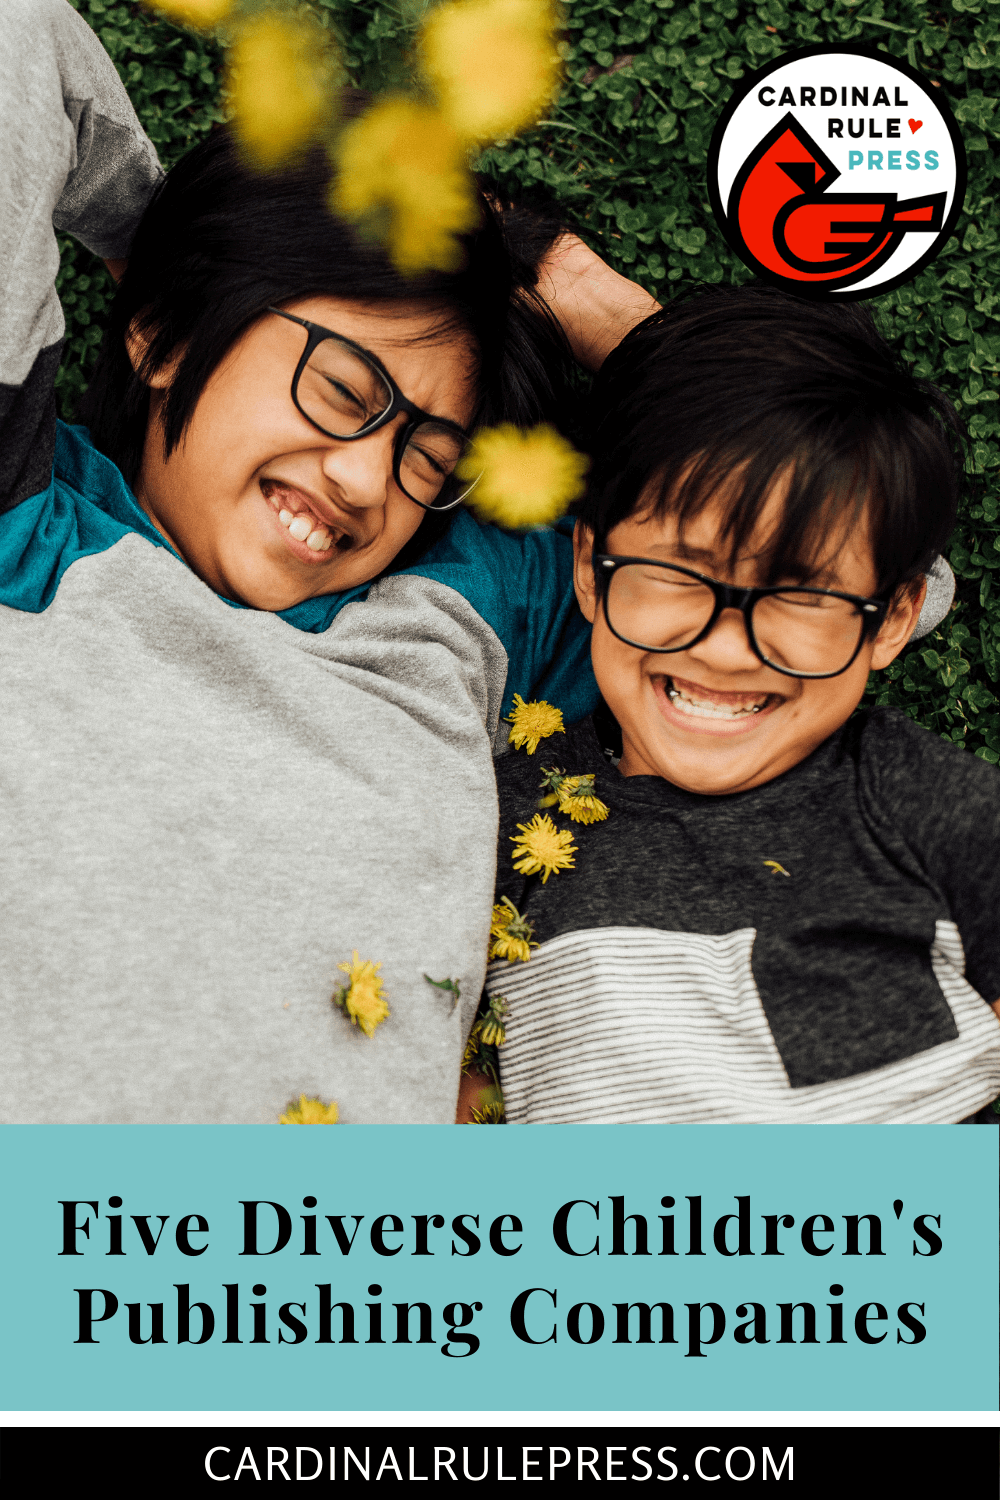 Five Diverse Children's Publishing Companies. Publishers out in the world trying to be inclusive of everyone. #PictureBooks #ChildrensBooks #Diversity #Publisher